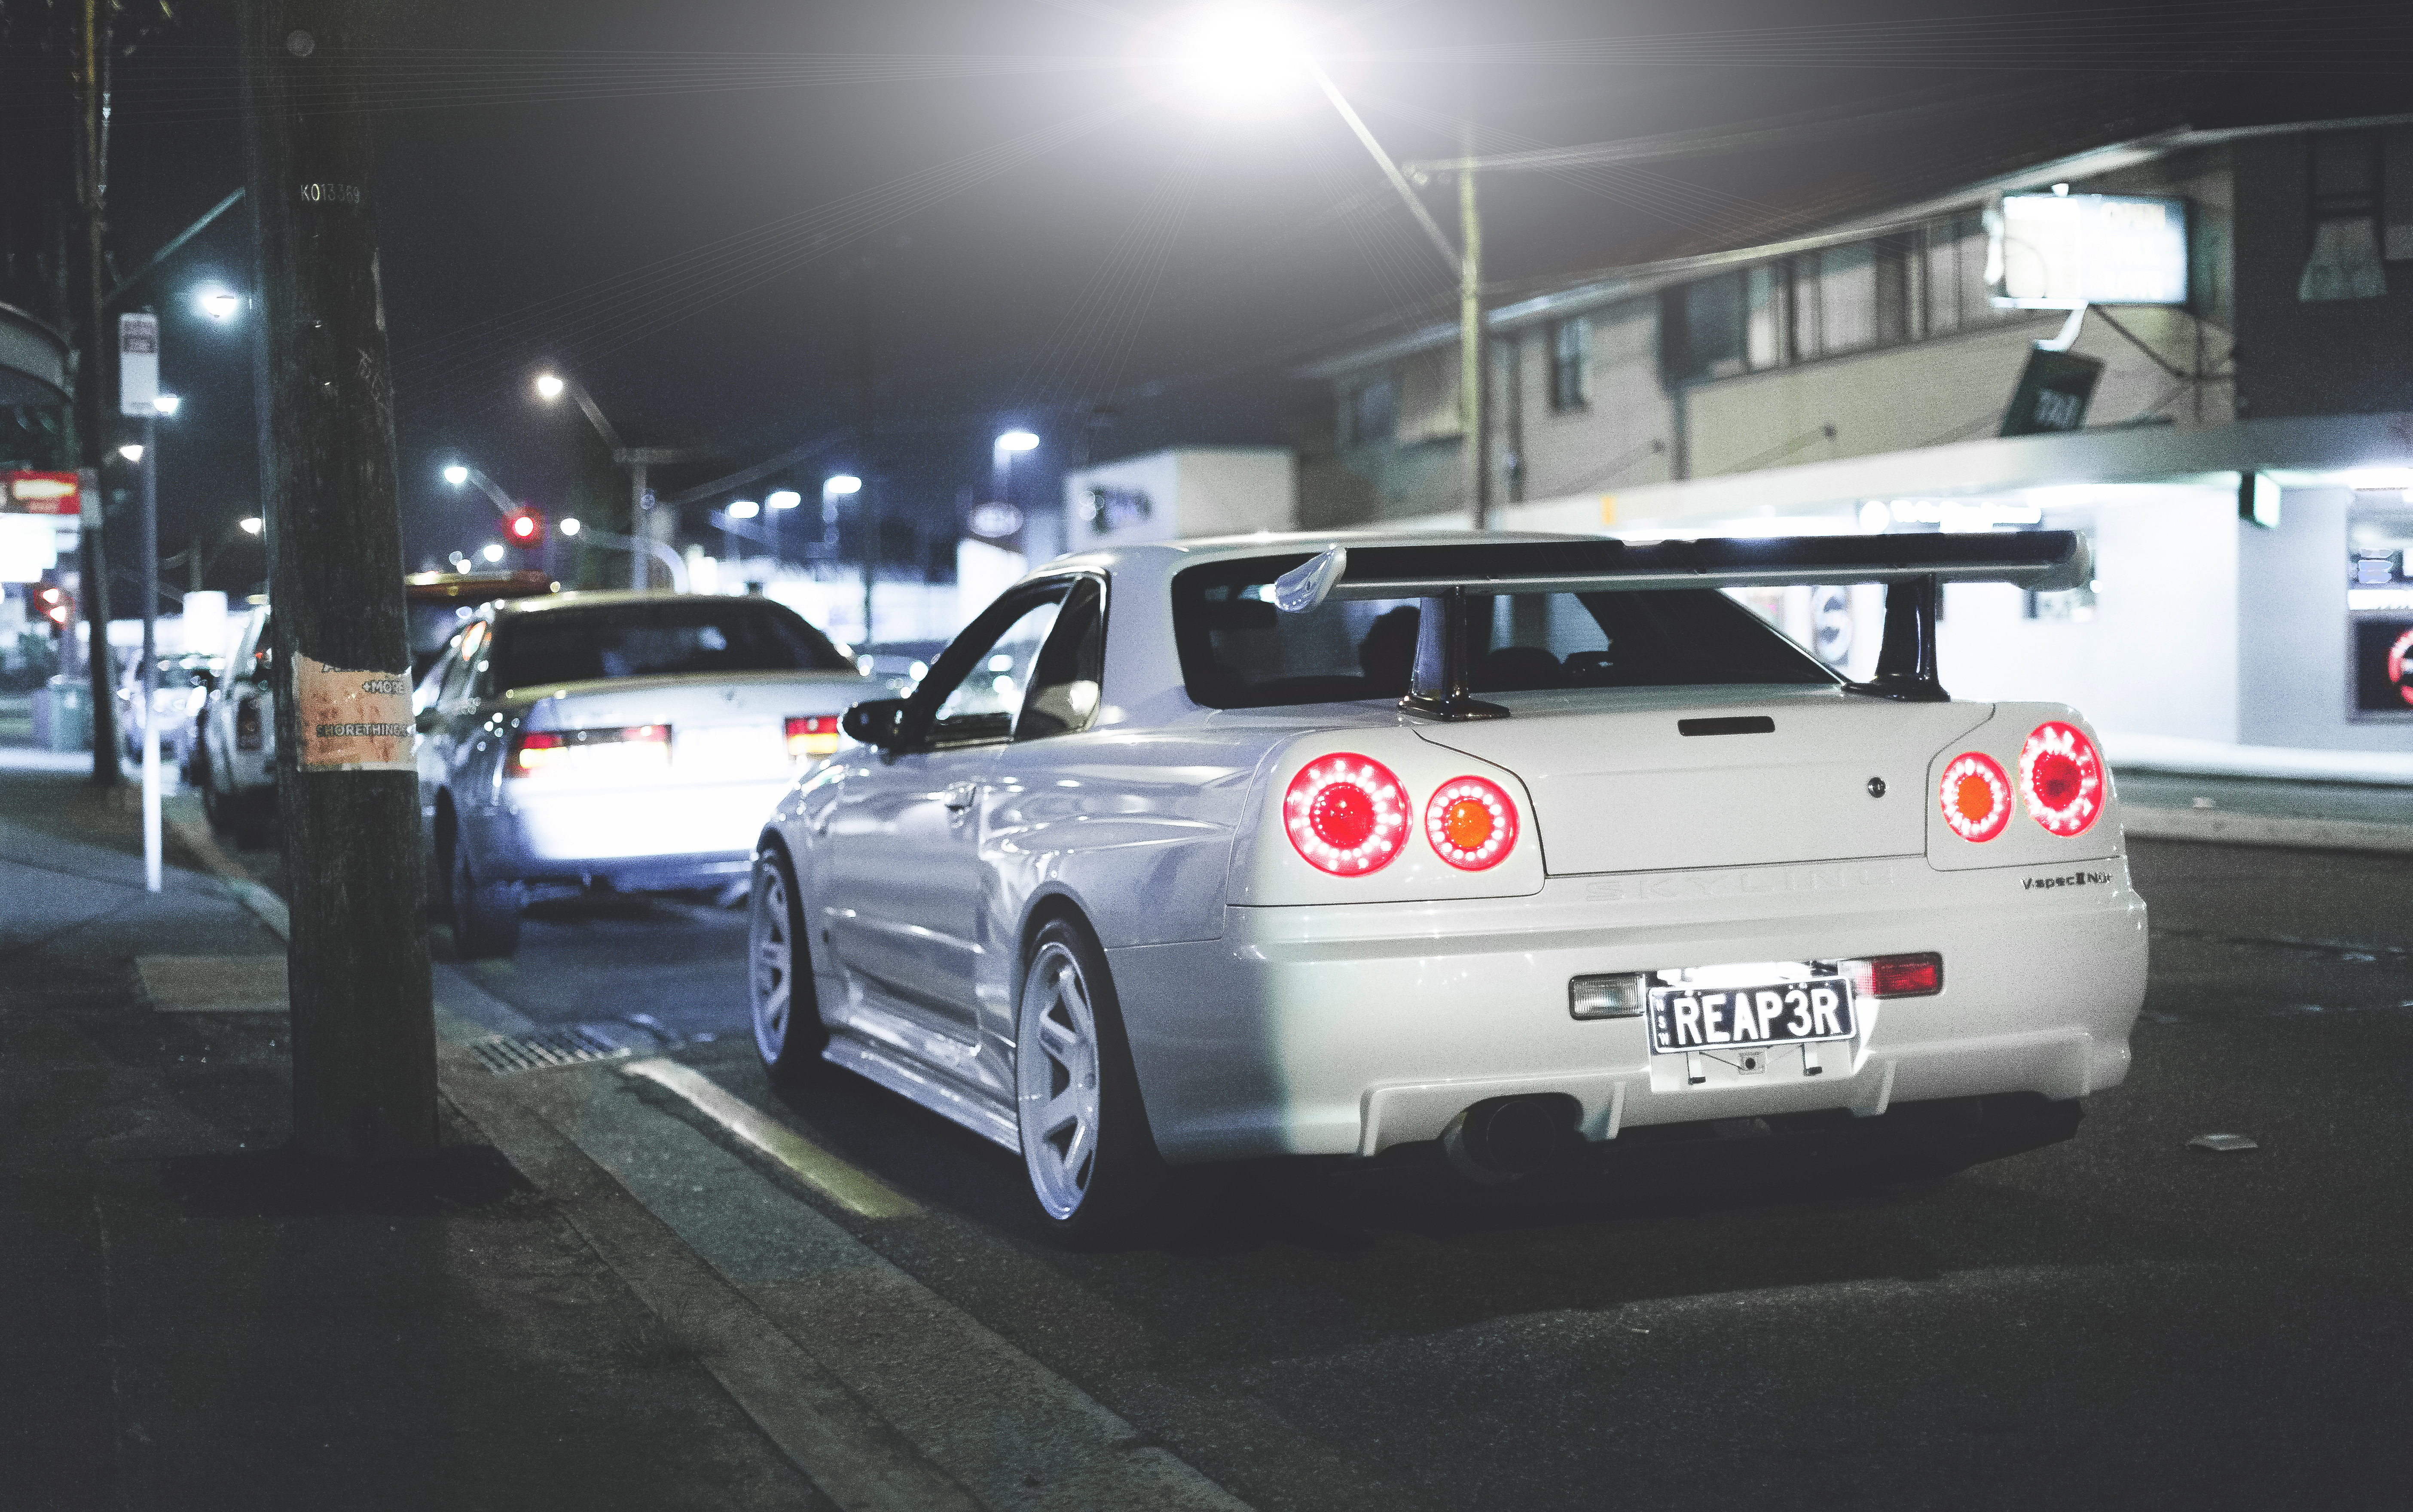 skyline, nissan, r34, cars, back view, rear view, gt r